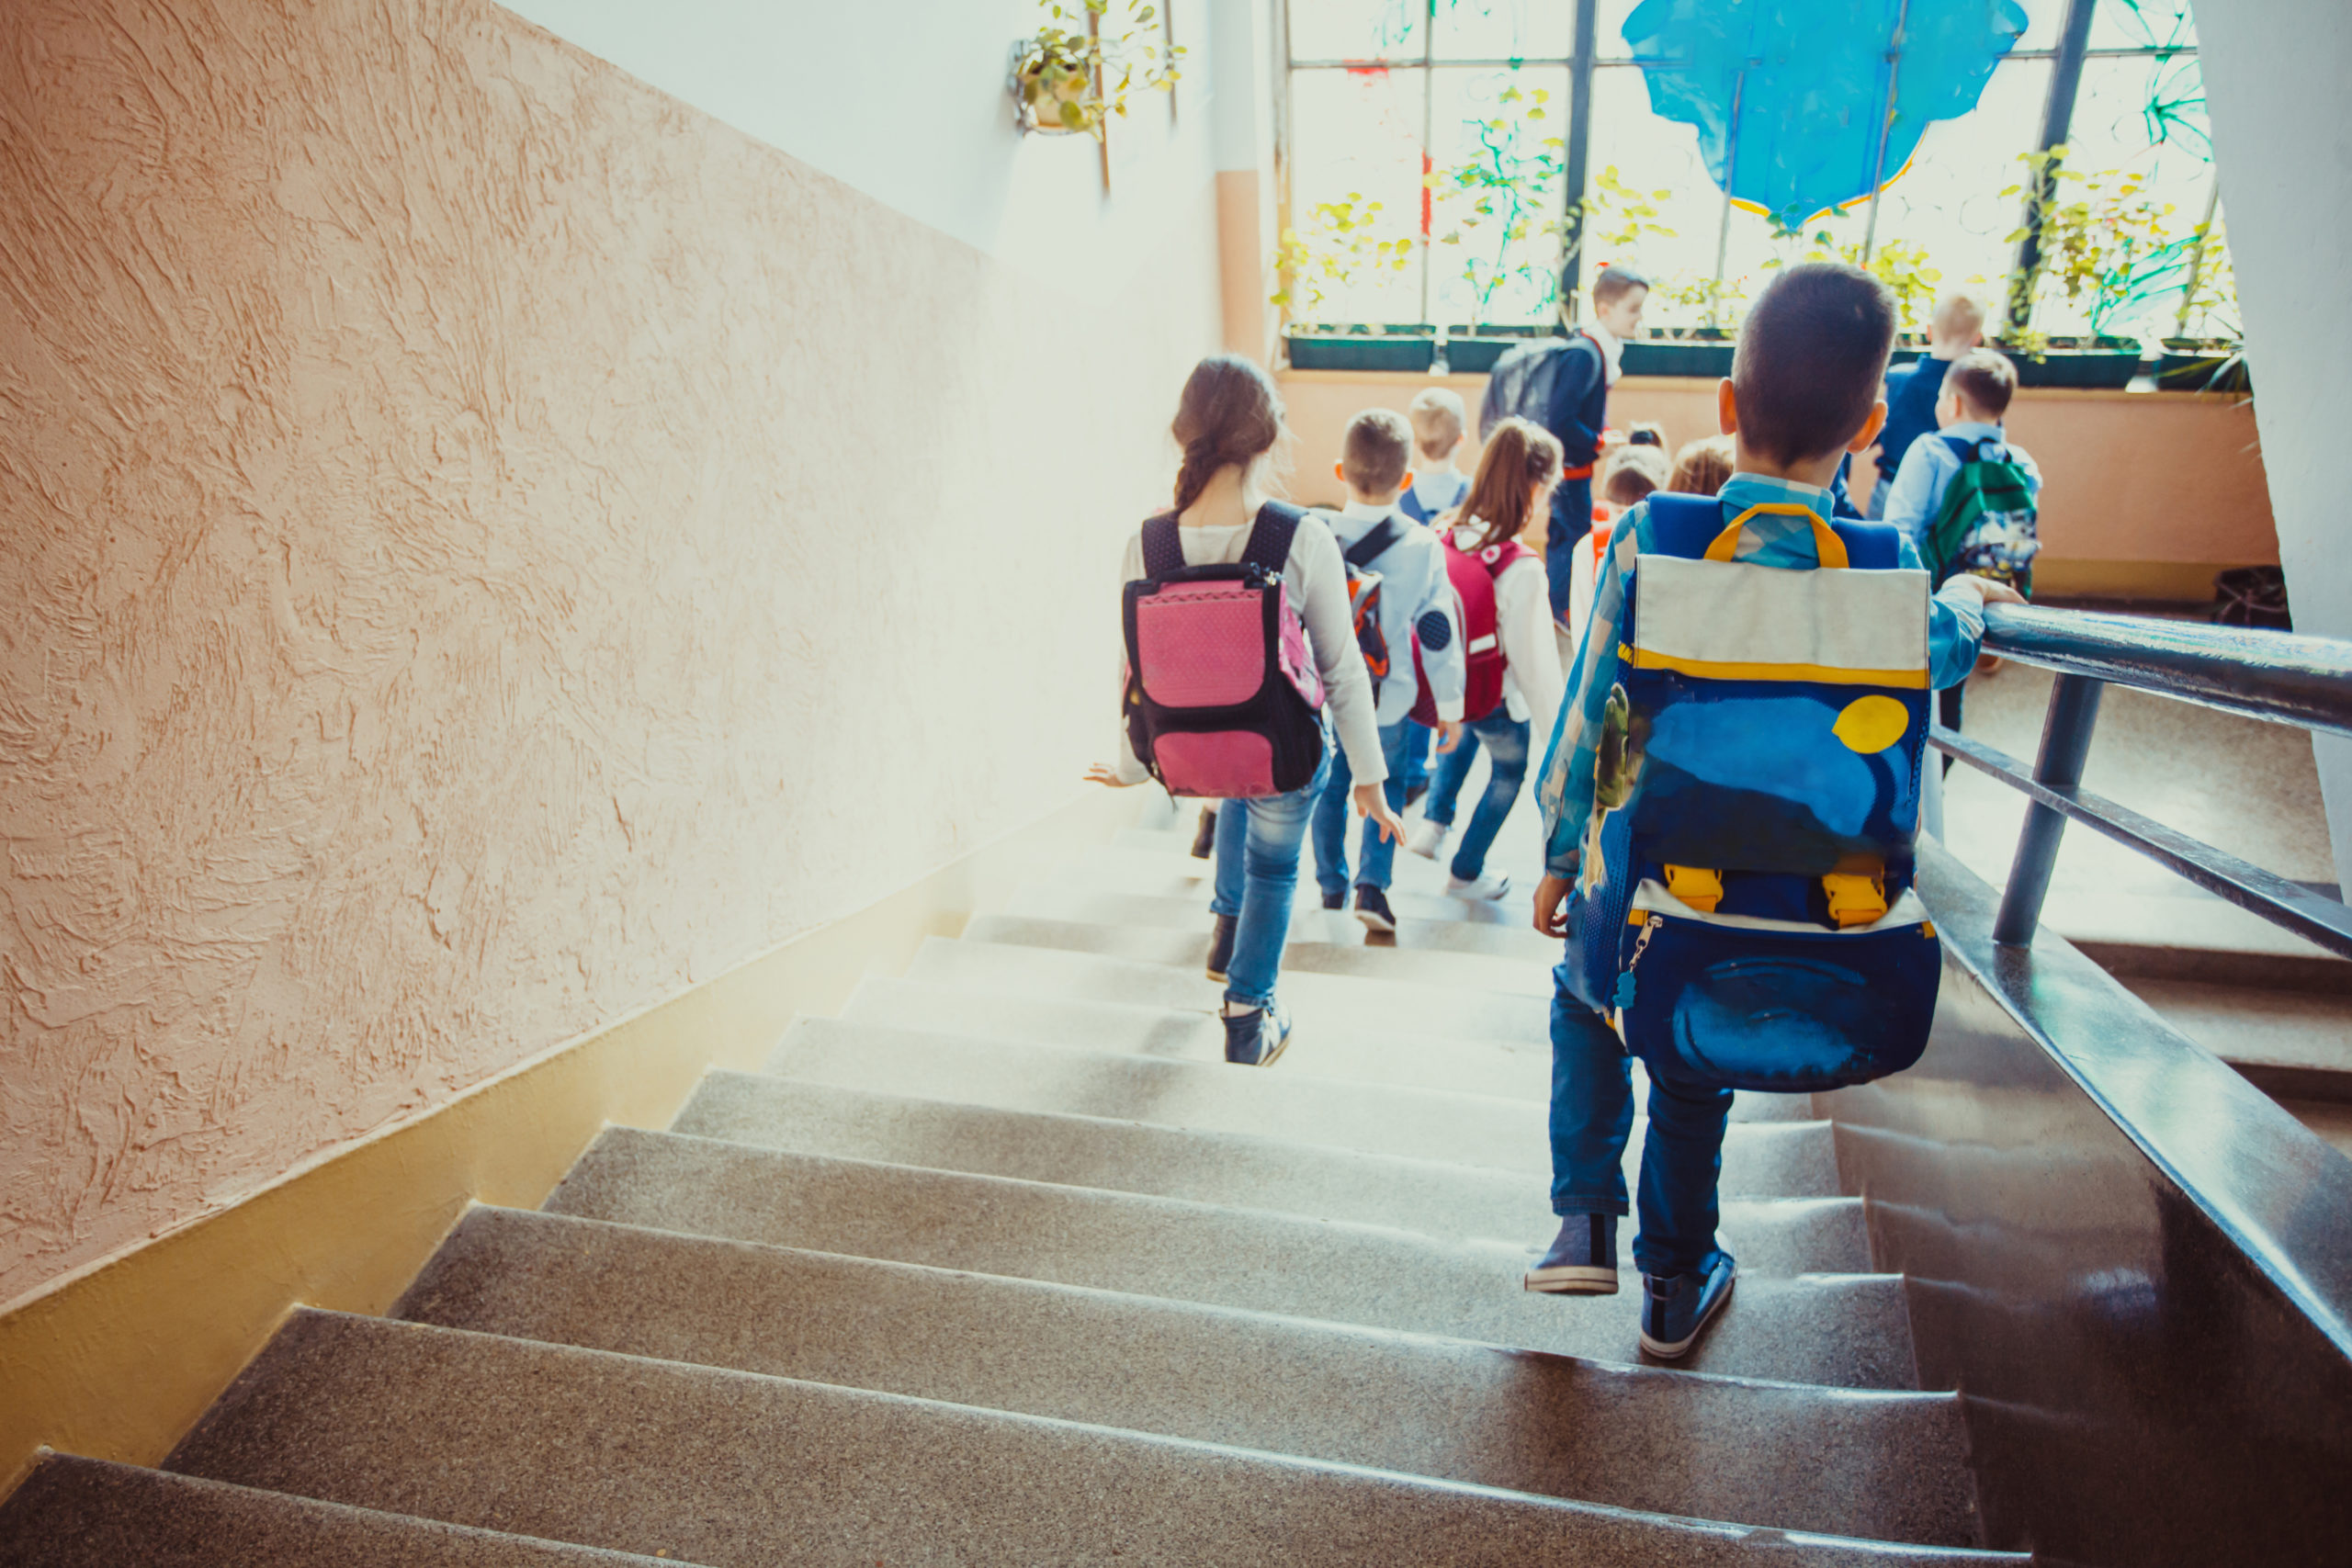 Children walking down the stairs in a school showing the importance of school safety